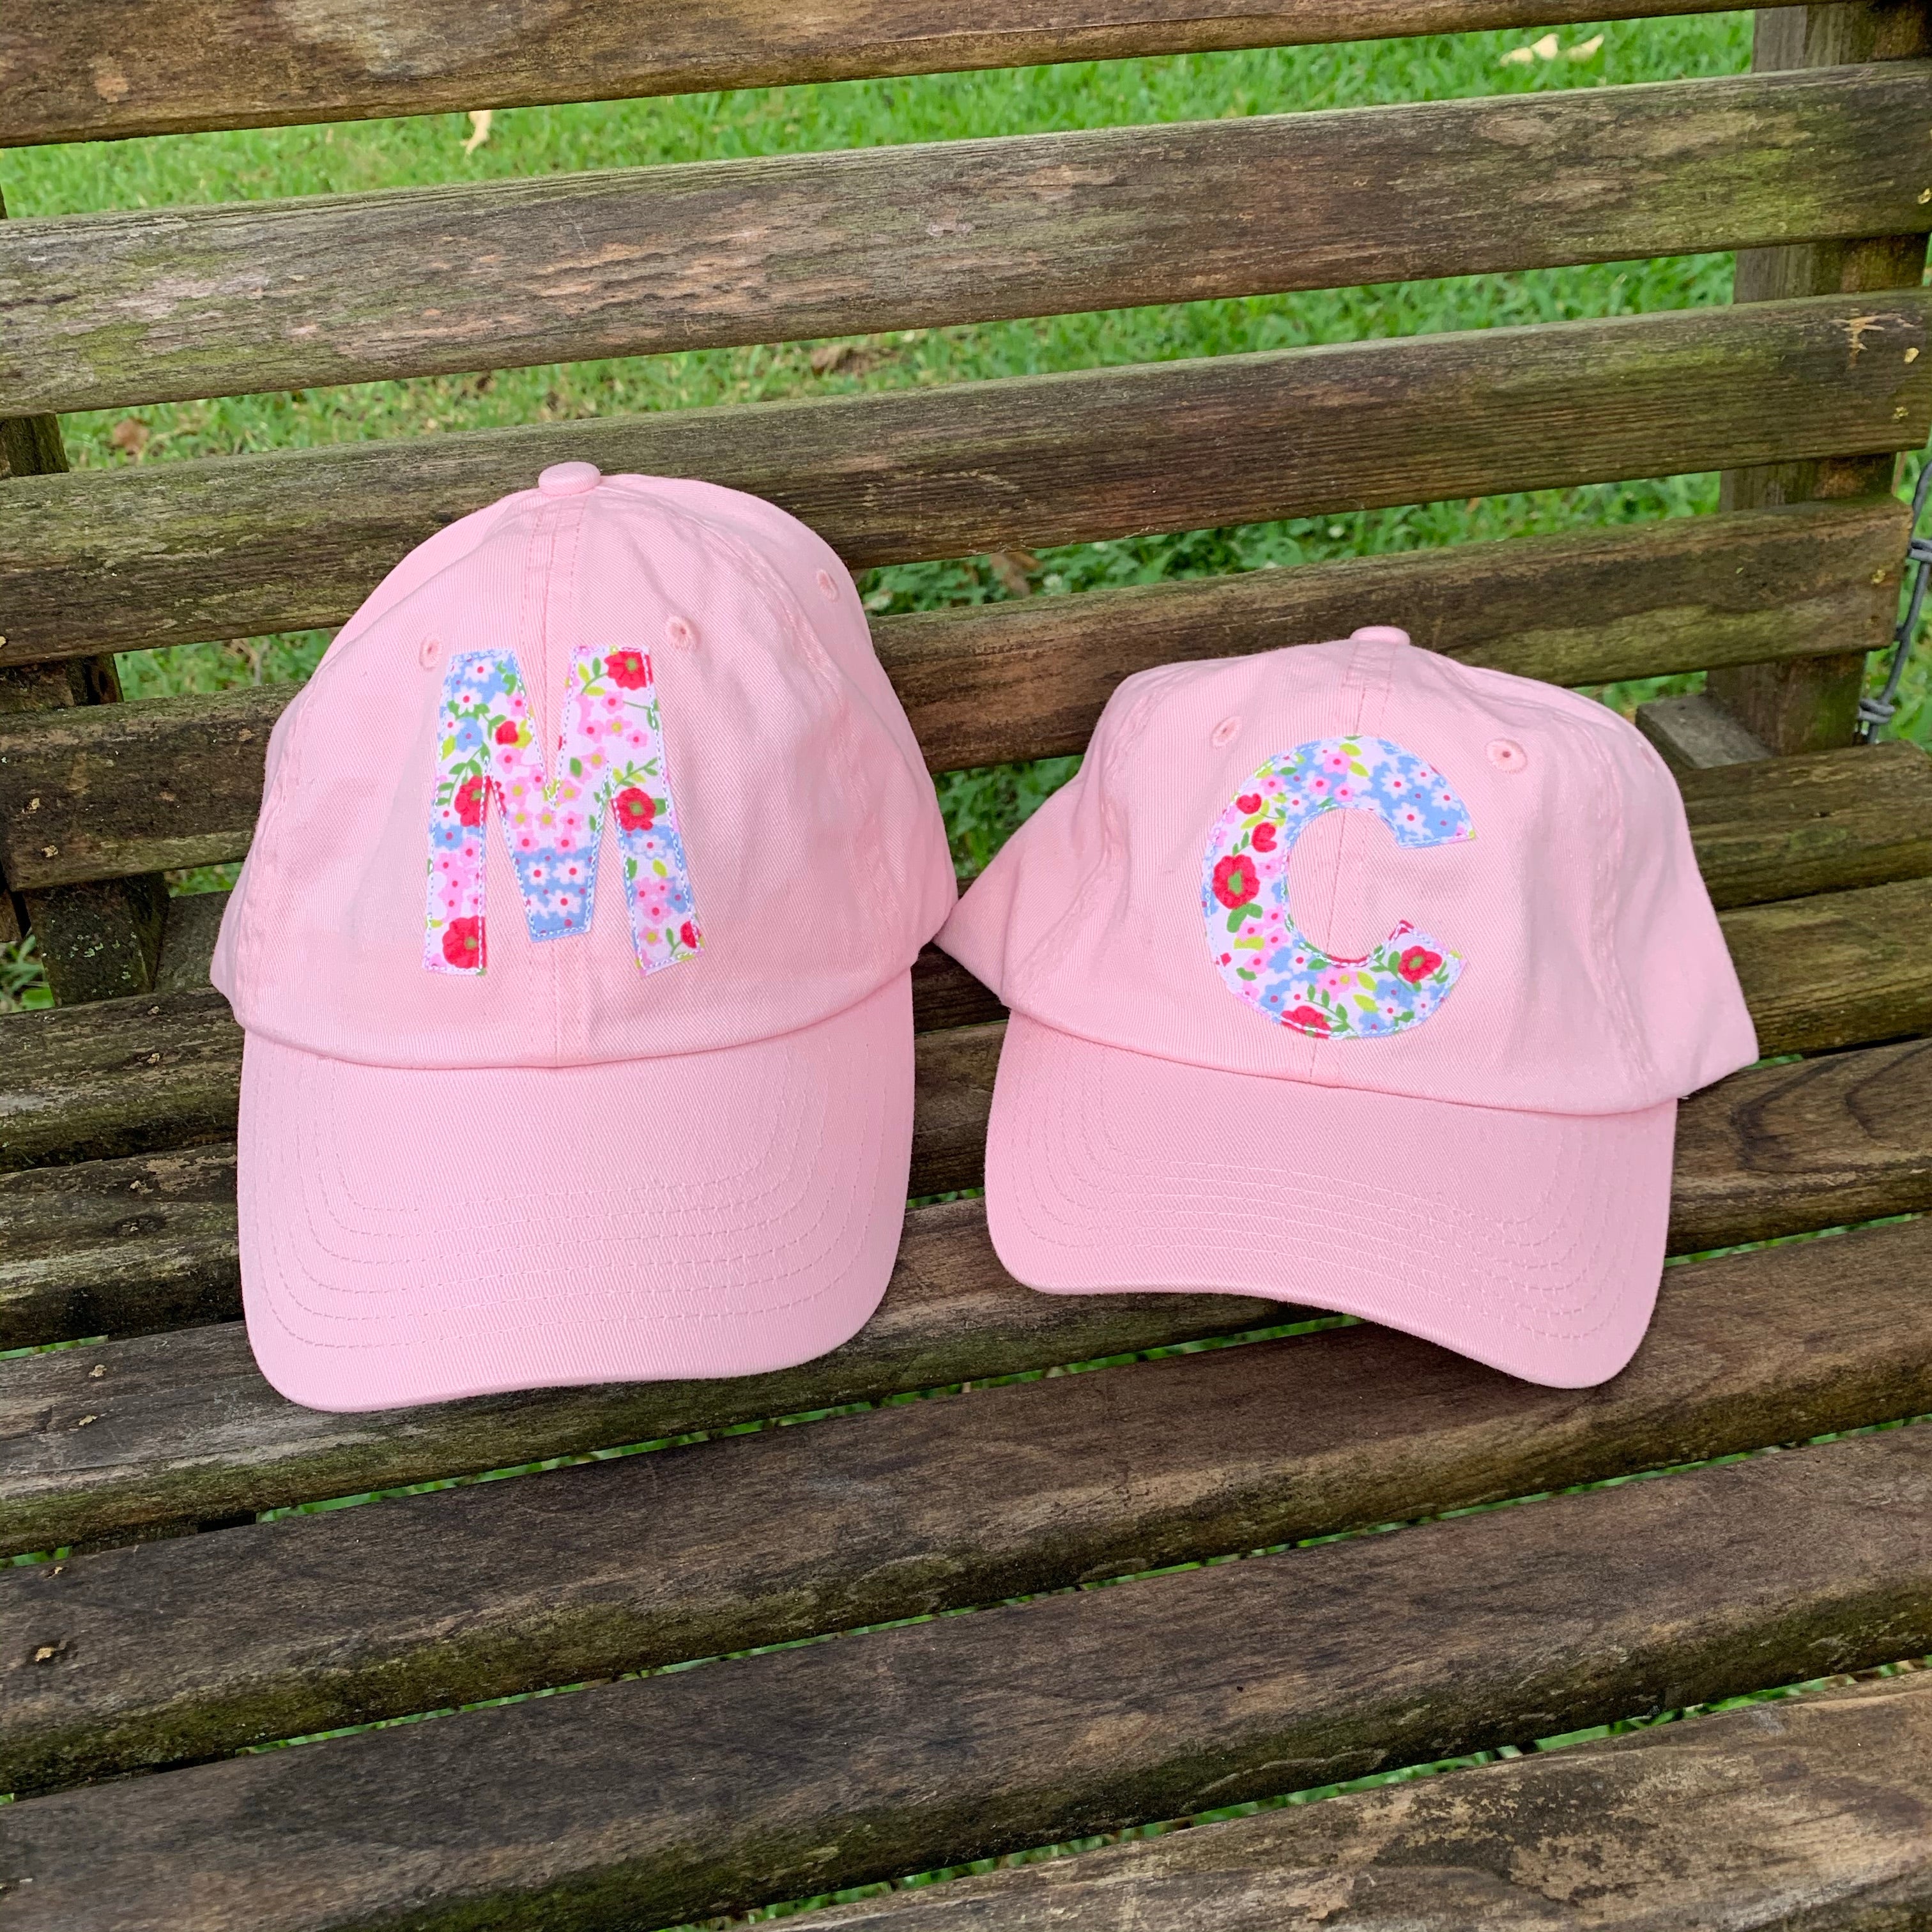 Mommy and me hats!